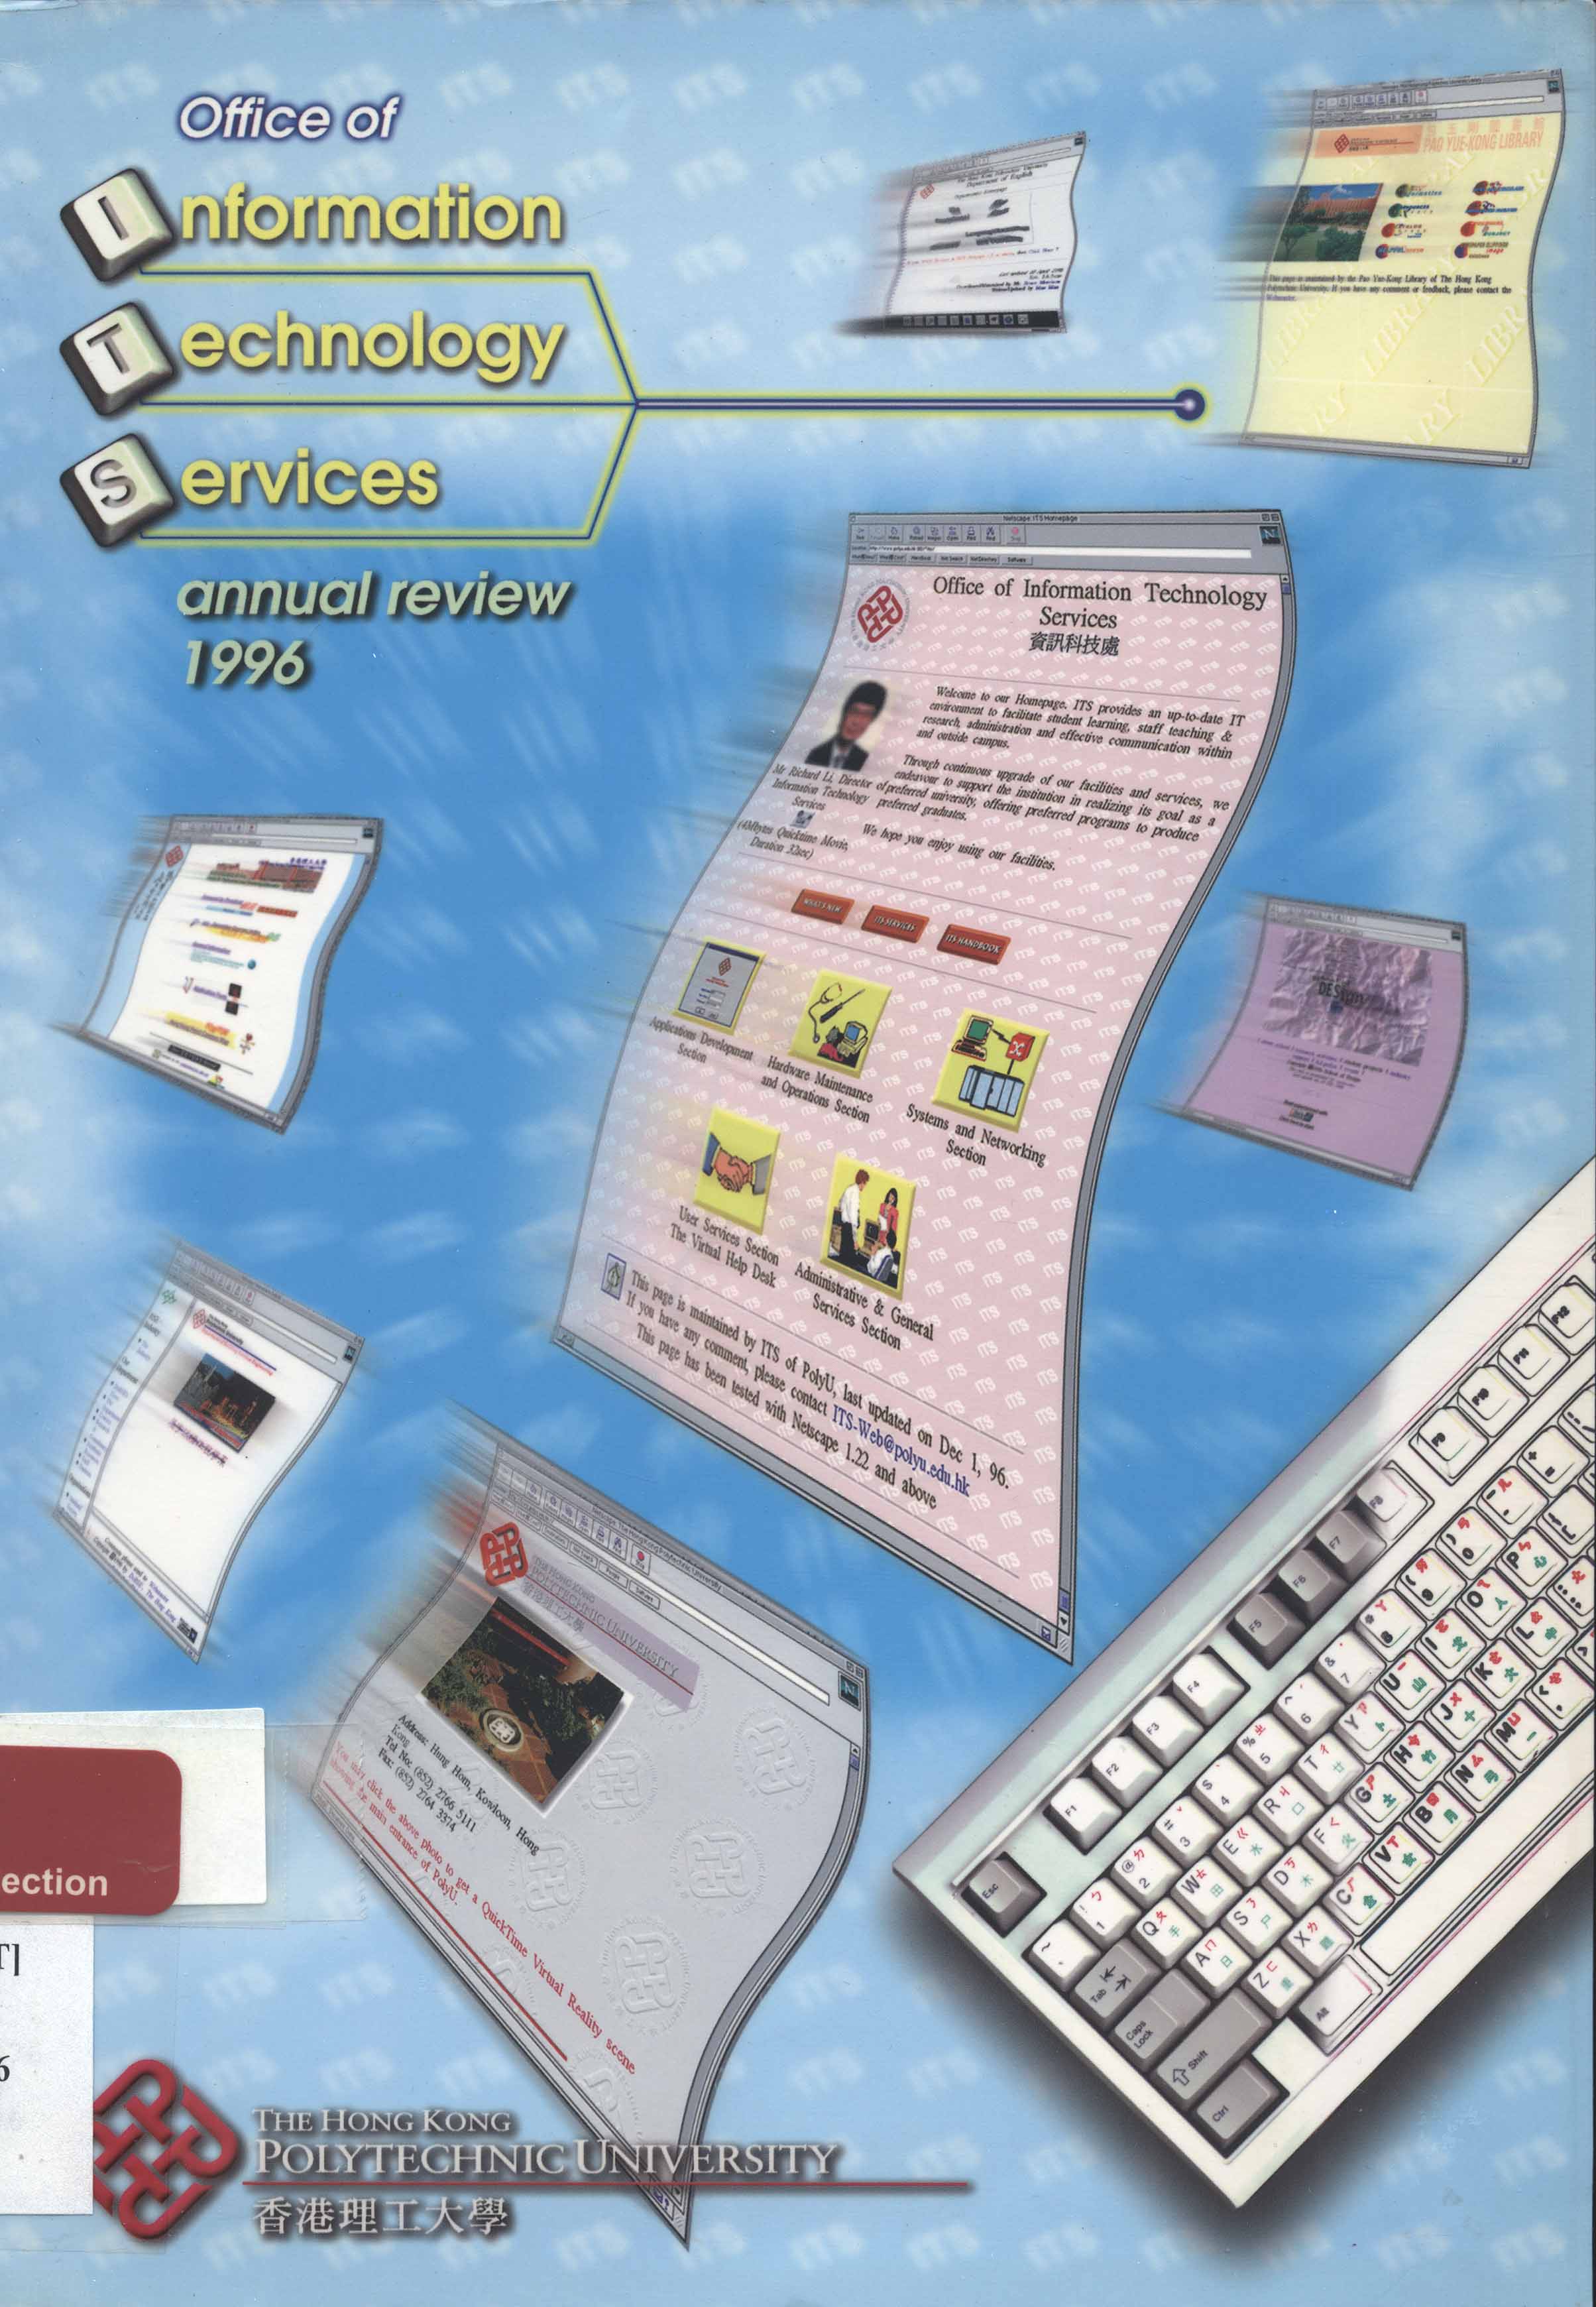 Office of Information Technology Services. Annual review 1996